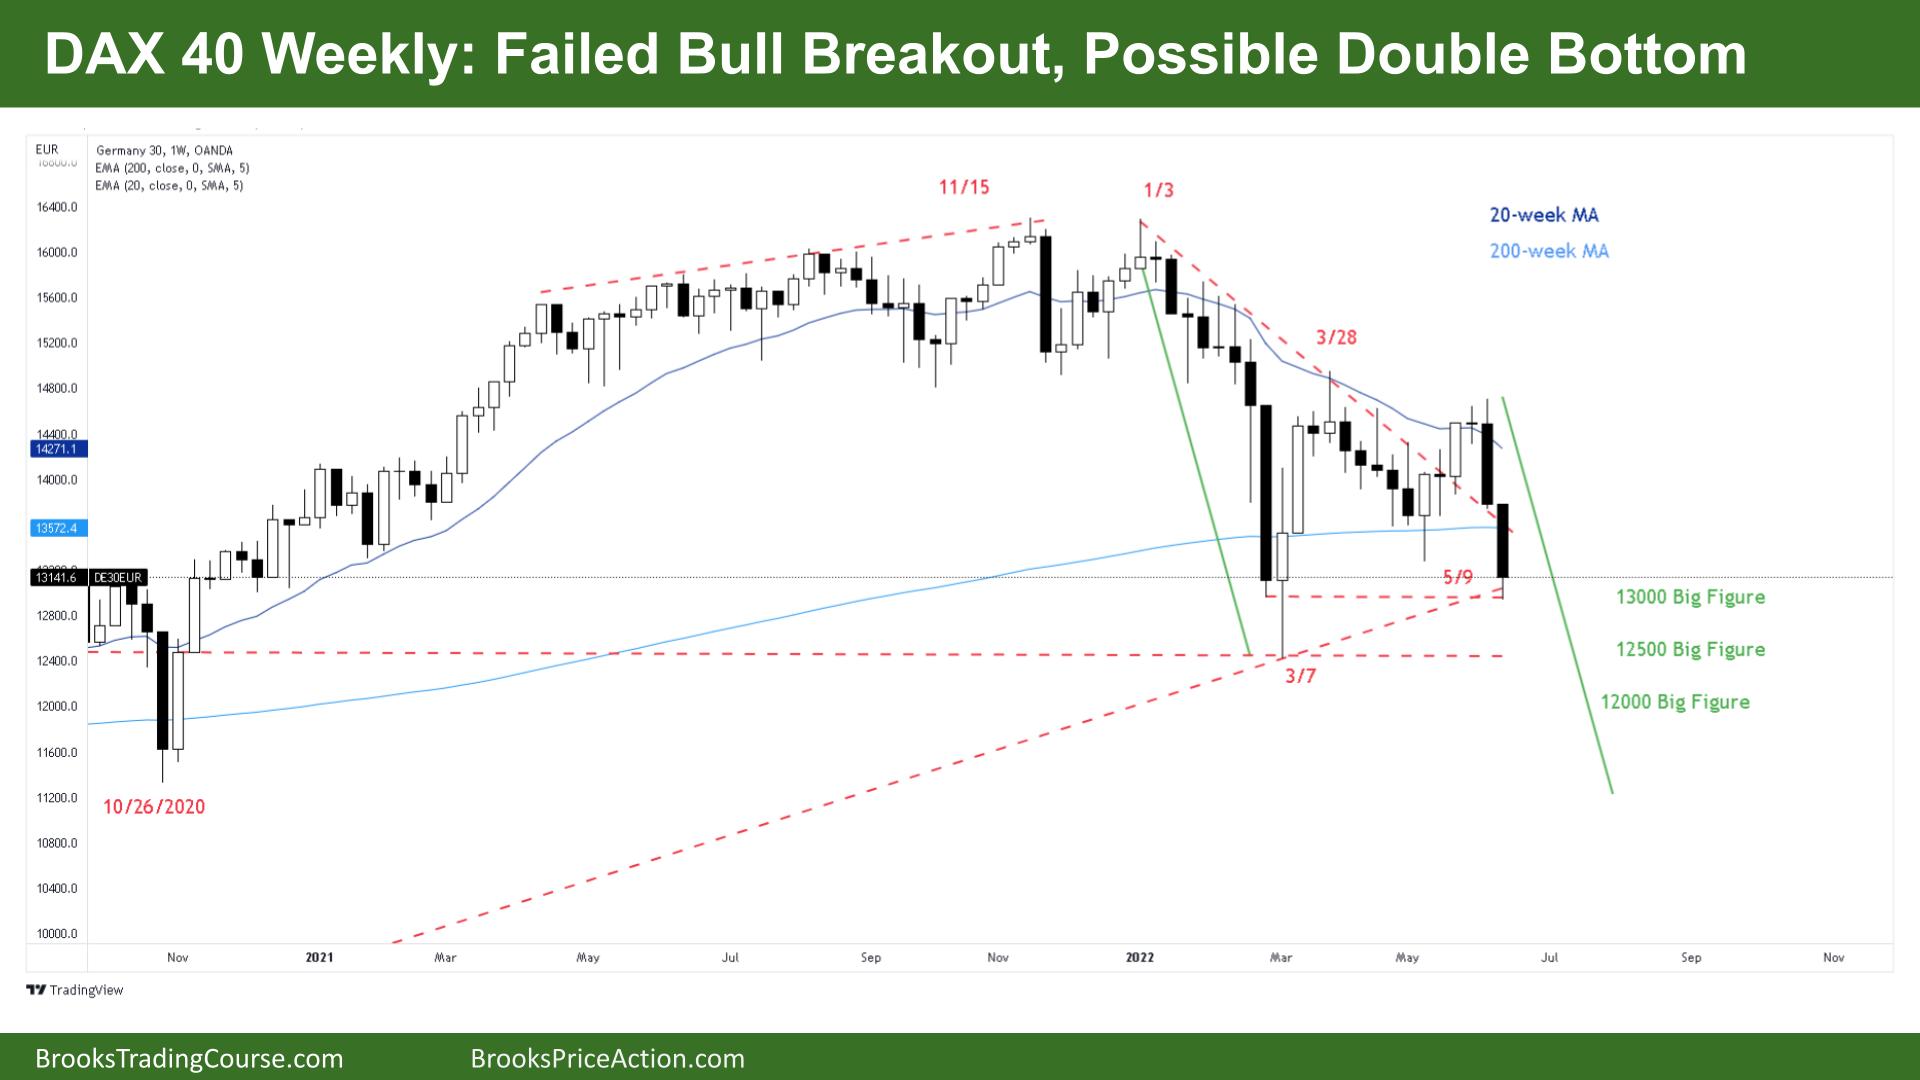 DAX Failed Bull Breakout Possible Double Bottom on Weekly Chart